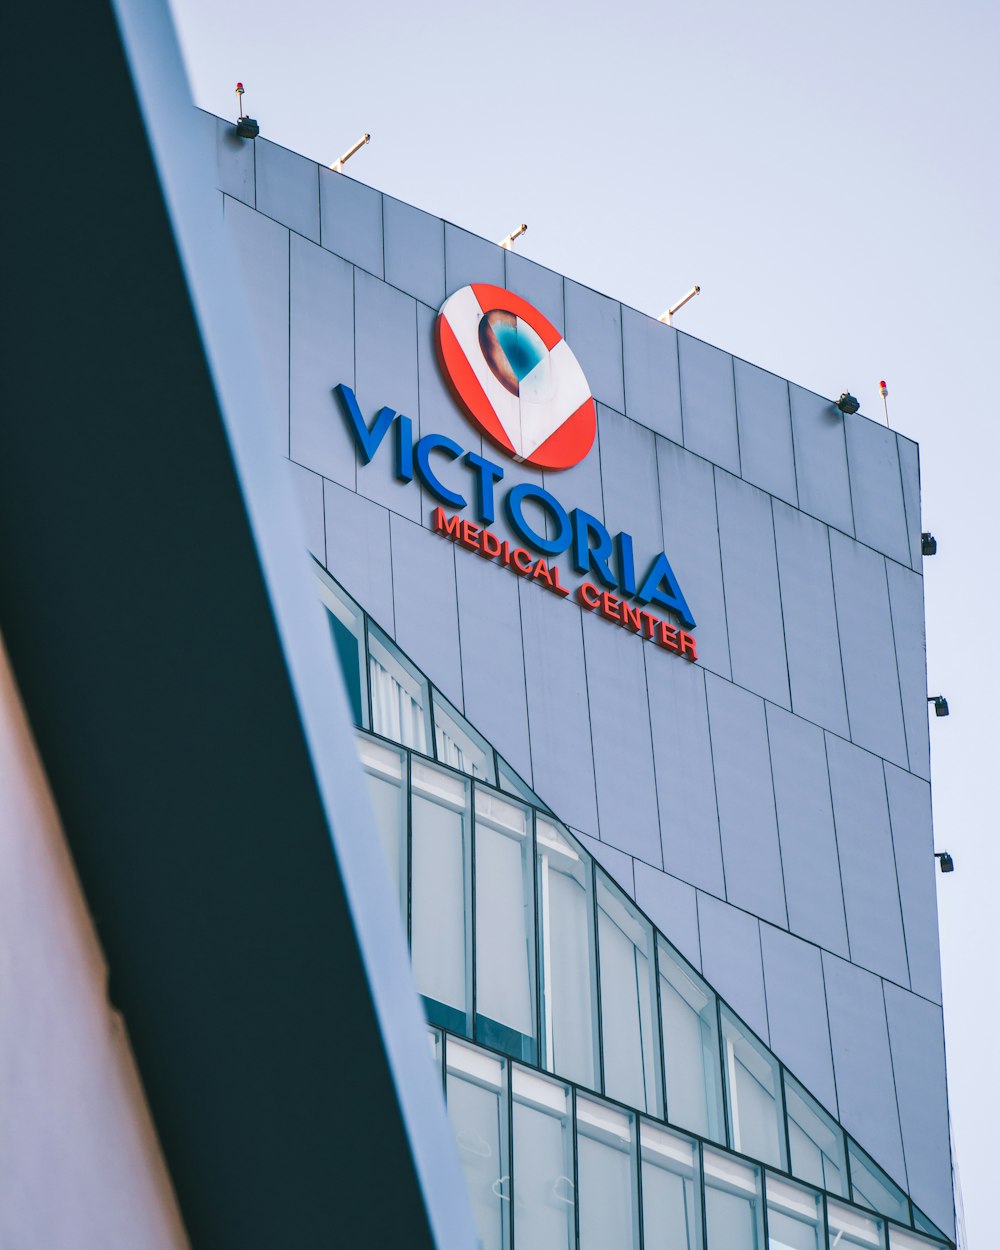 the victoria medical centre sign on the side of a building